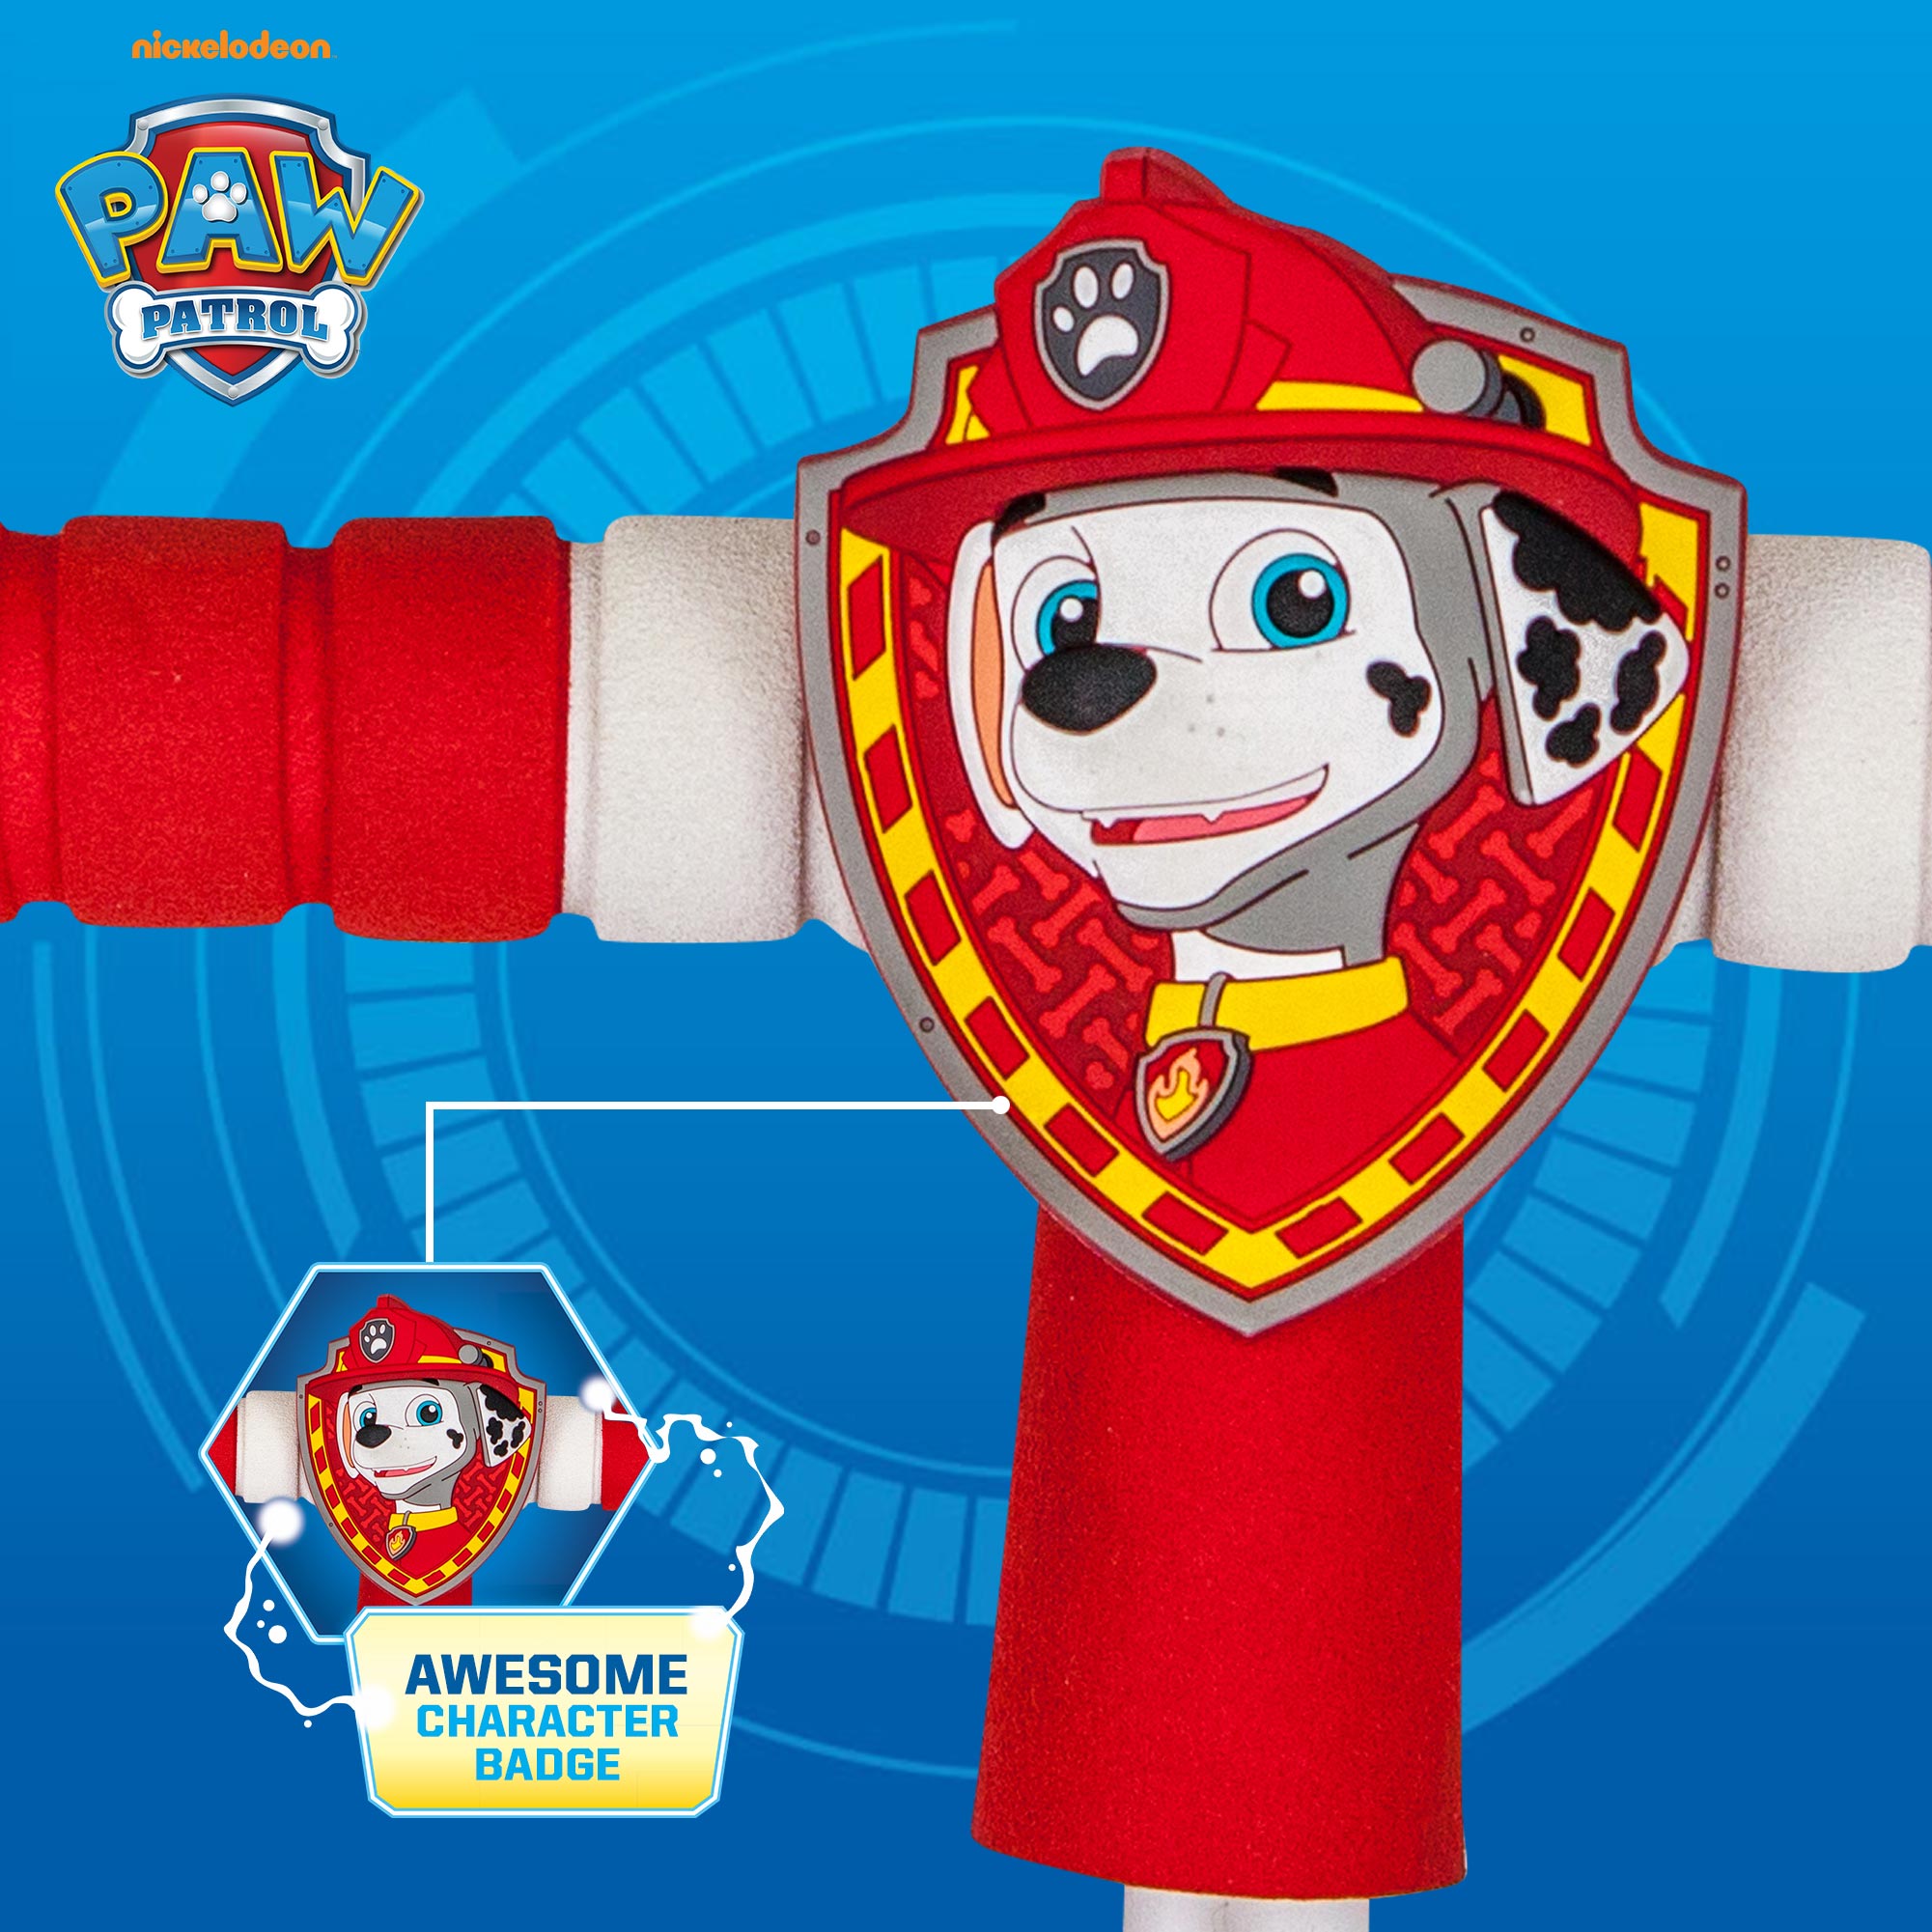 Paw Patrol My First Flybar Stretchy Foam Hopper, Kids Ages 3+ Up to 25